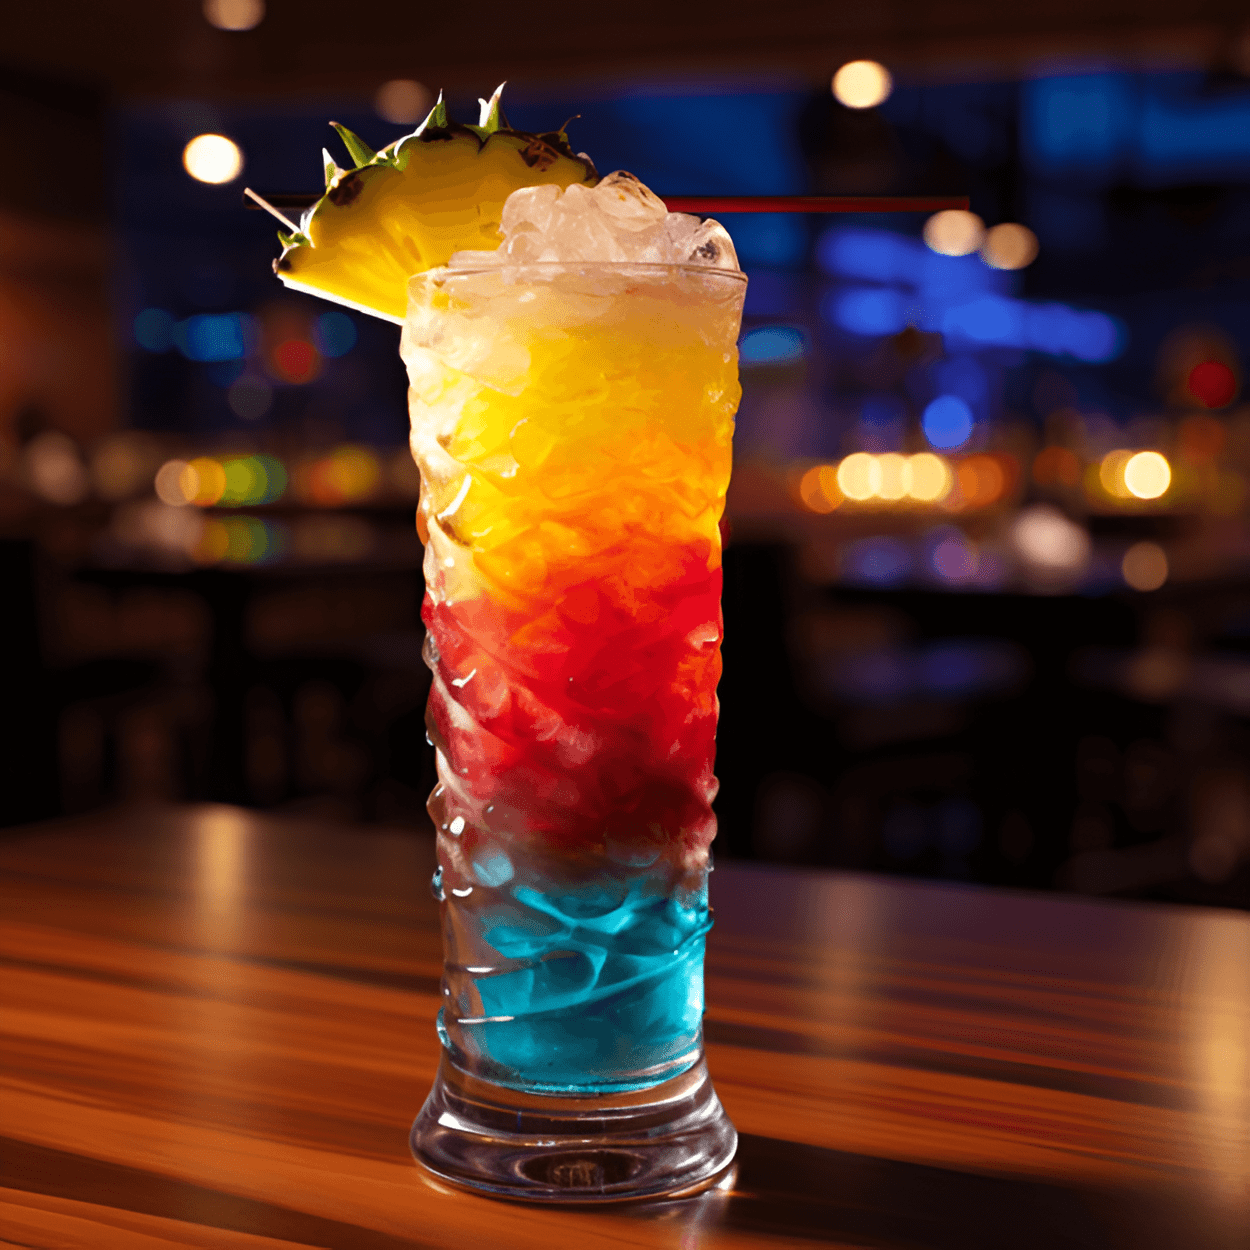 The Rainbow Cocktail is a sweet and fruity drink. It's a mix of tropical flavors, with a hint of citrus and a smooth, creamy finish. The different layers each bring their own unique taste, creating a cocktail that's full of flavor and fun to drink.